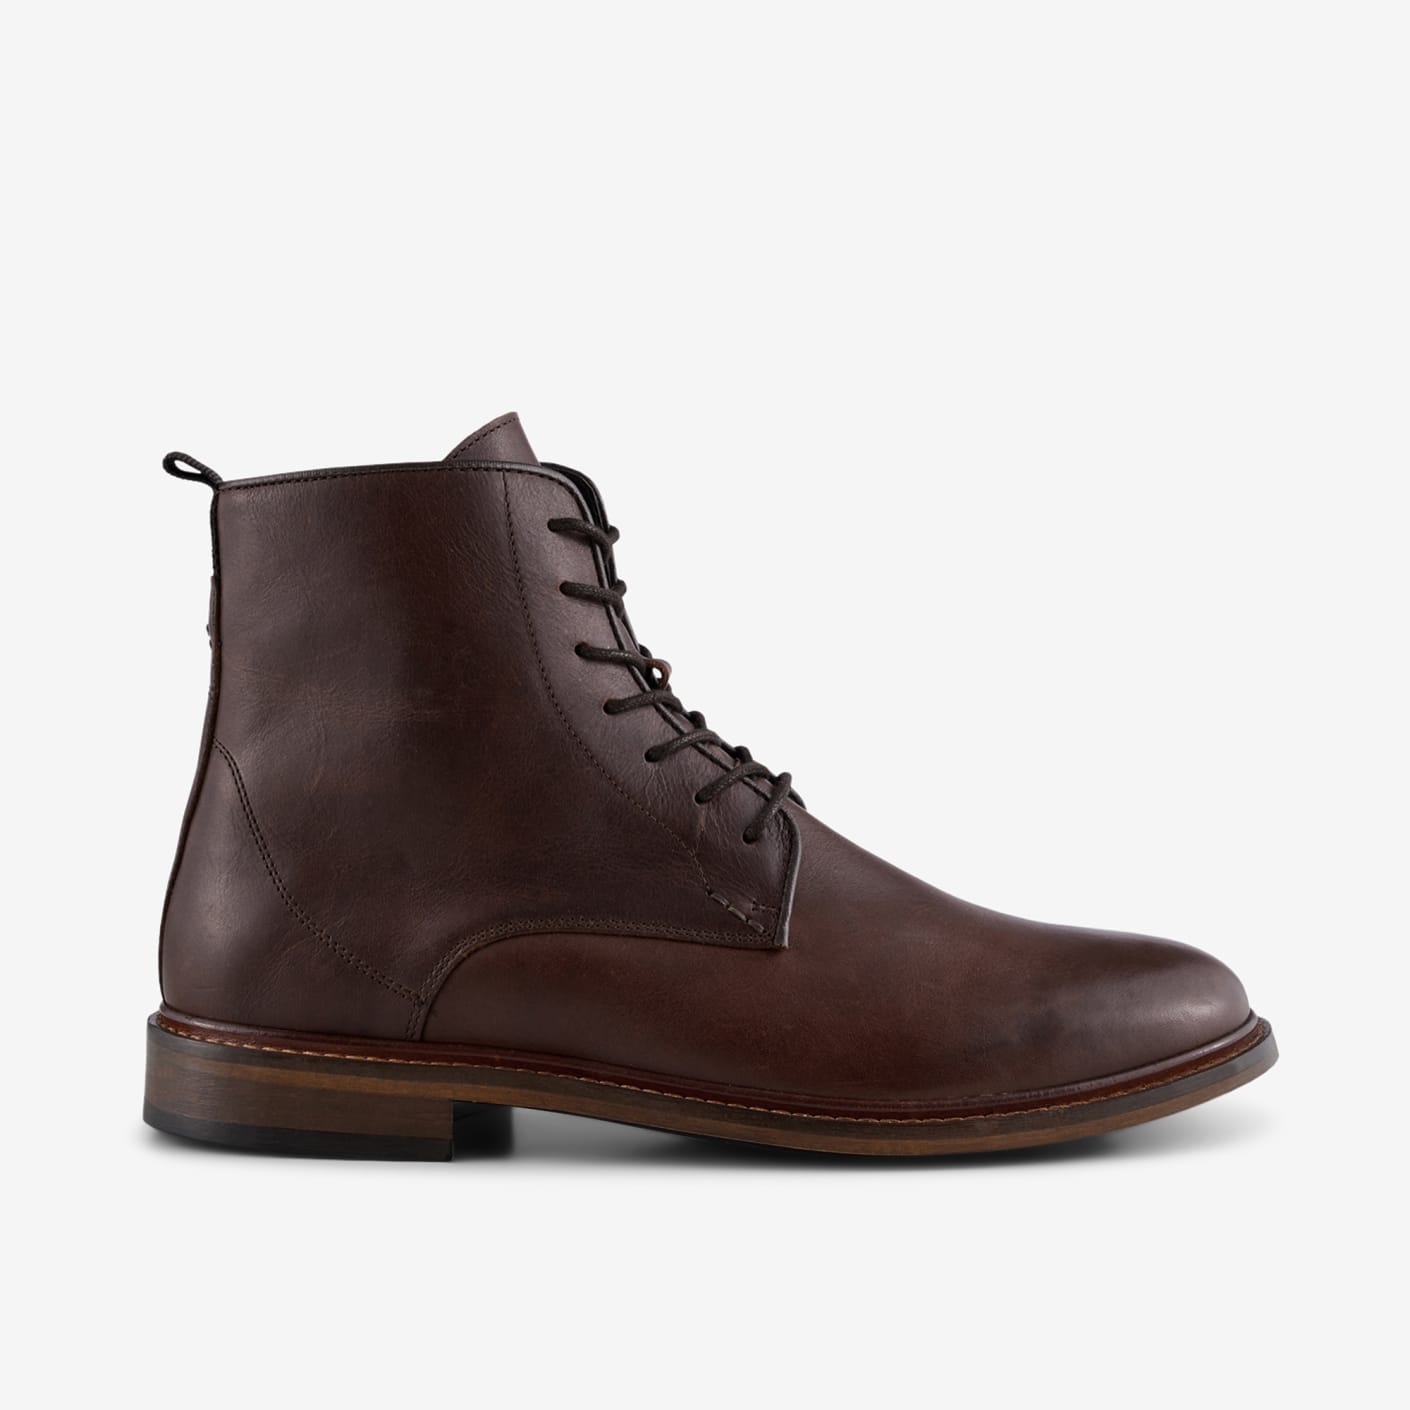 Shoe The Bear Ned Leather Boot, Chestnut Brown | Bespoke Post